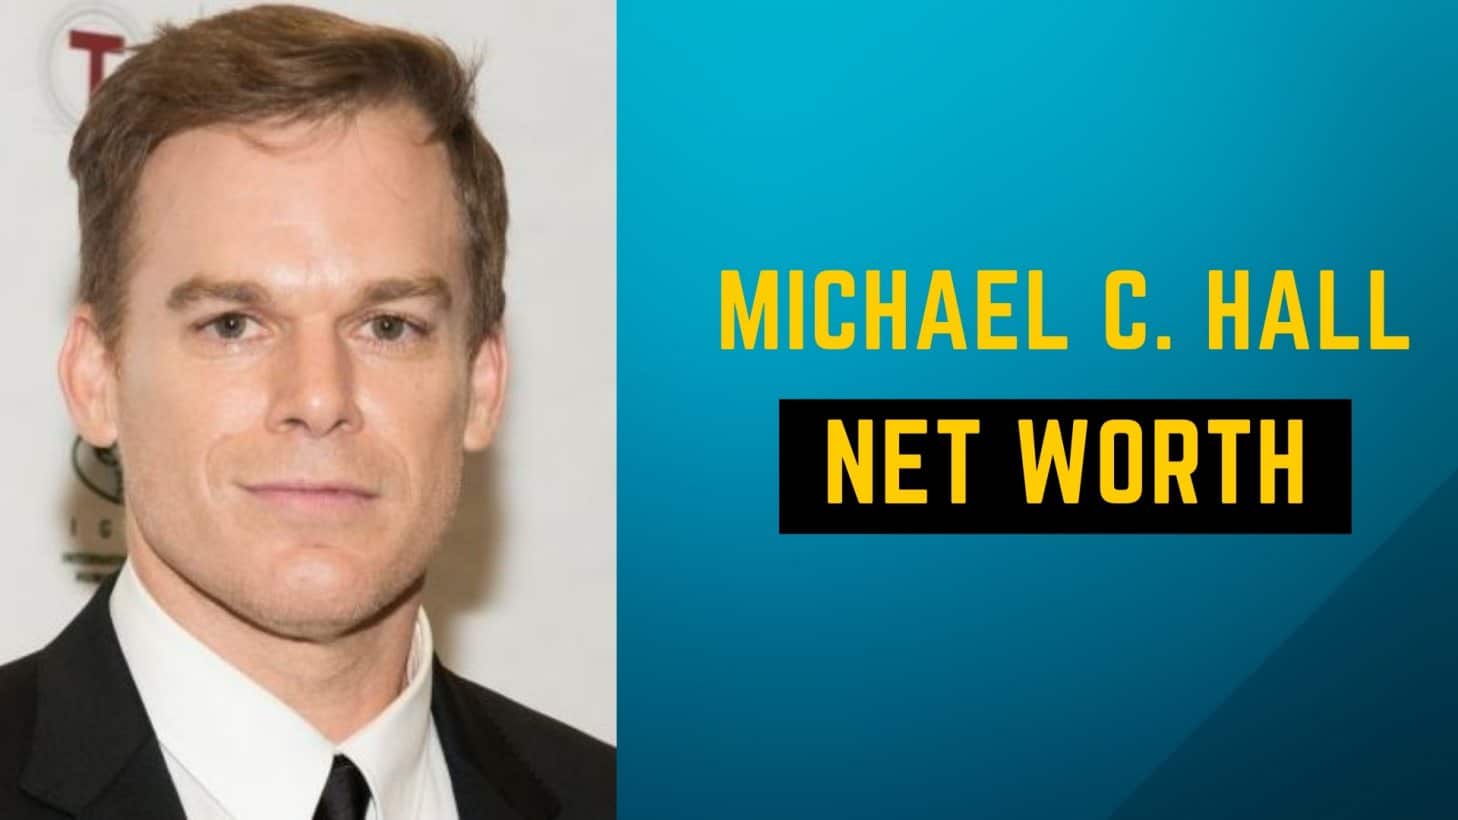 Michael C Hall Net Worth 2022: Dexter New Blood Star Net Worth Income And Wealth?